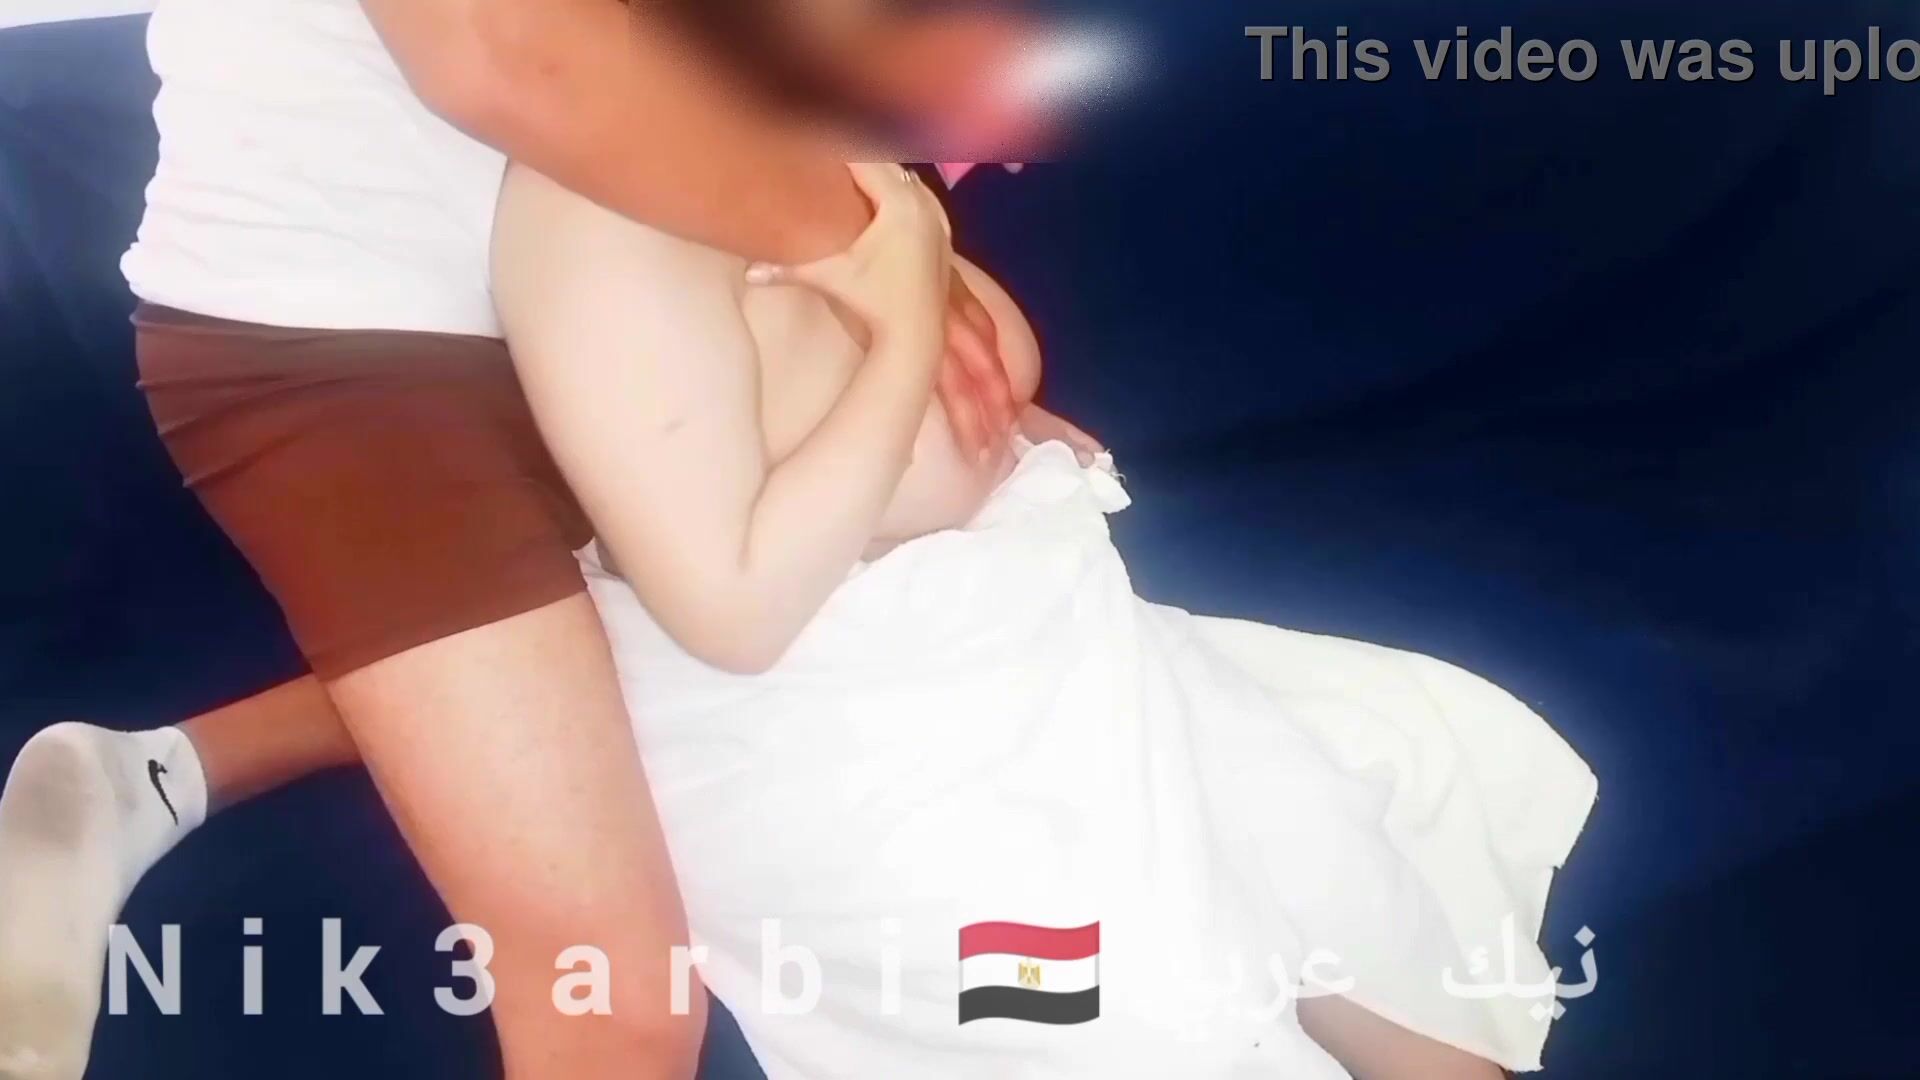 An Egyptian boy doing a massage and feeling on the tits of an adult picture